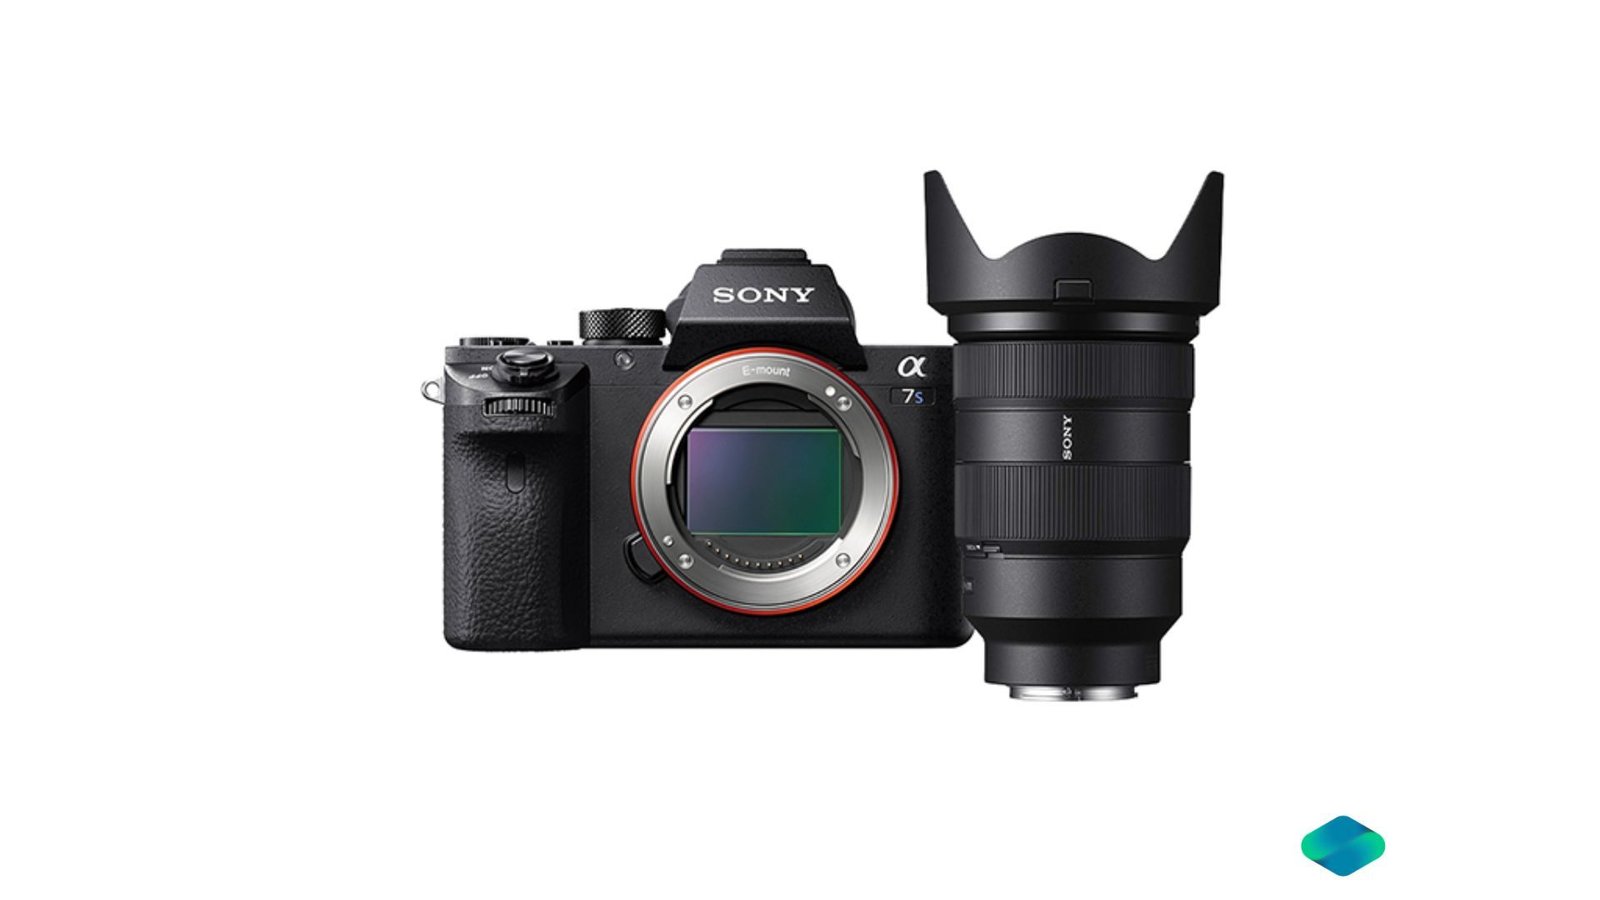 Rent Sony - A7S -II (Body) with Metabone Adapter in Delhi NCR, Rent Camera, Camera accessories, Camera lenses for rent, in Delhi Gurgaon Noida, hire Shooting equipment, Lighting equipment rental, Film gear rental for Video production, camera rental company in Delhi, film equipment rental company